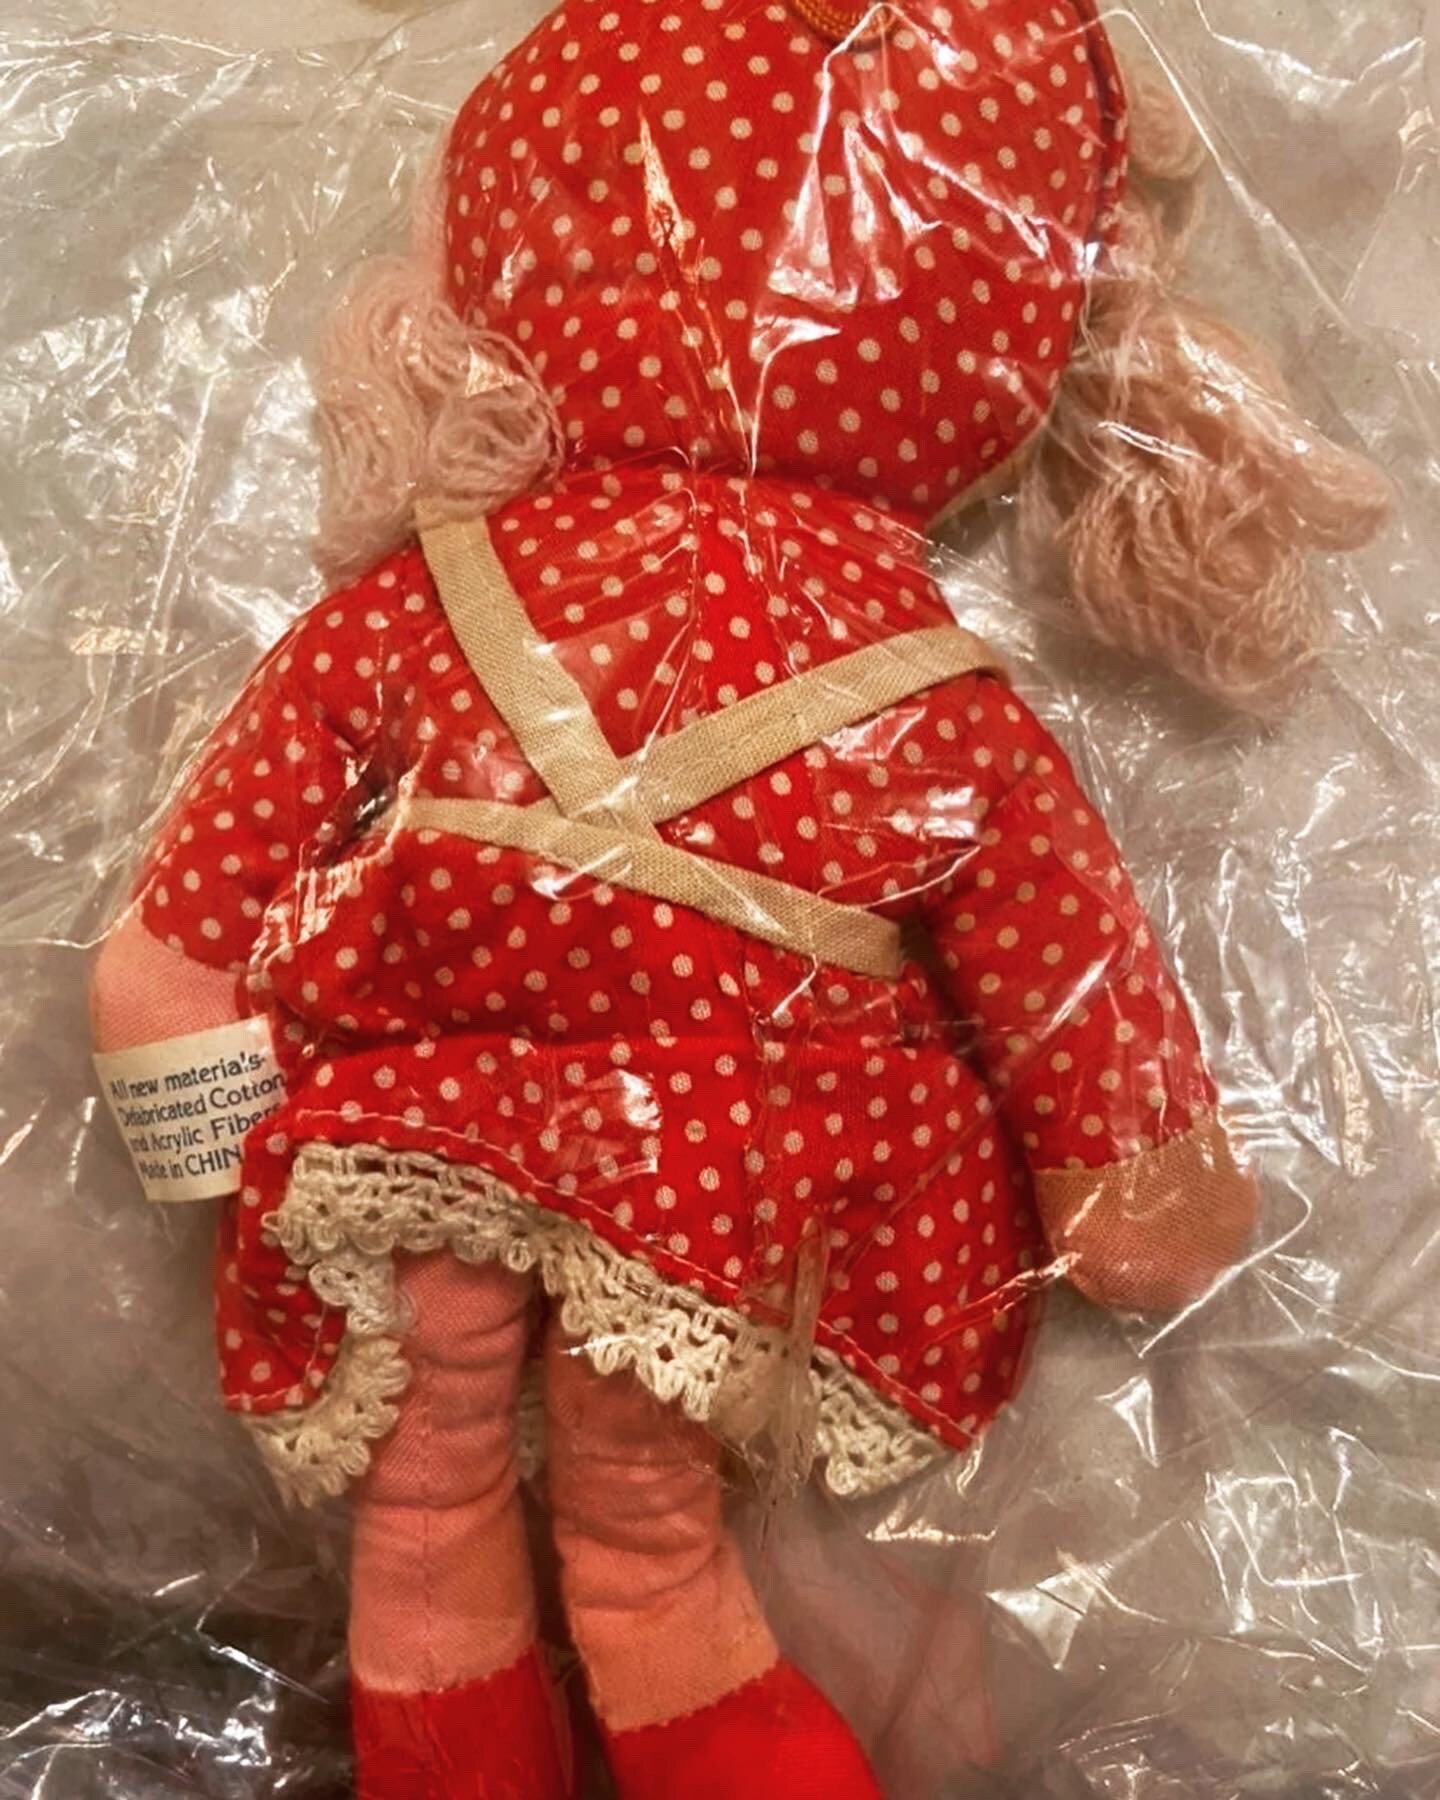 Vintage doll  toy 70s rare cherry apron and red shoes Red and white polka dot dress classic collectible